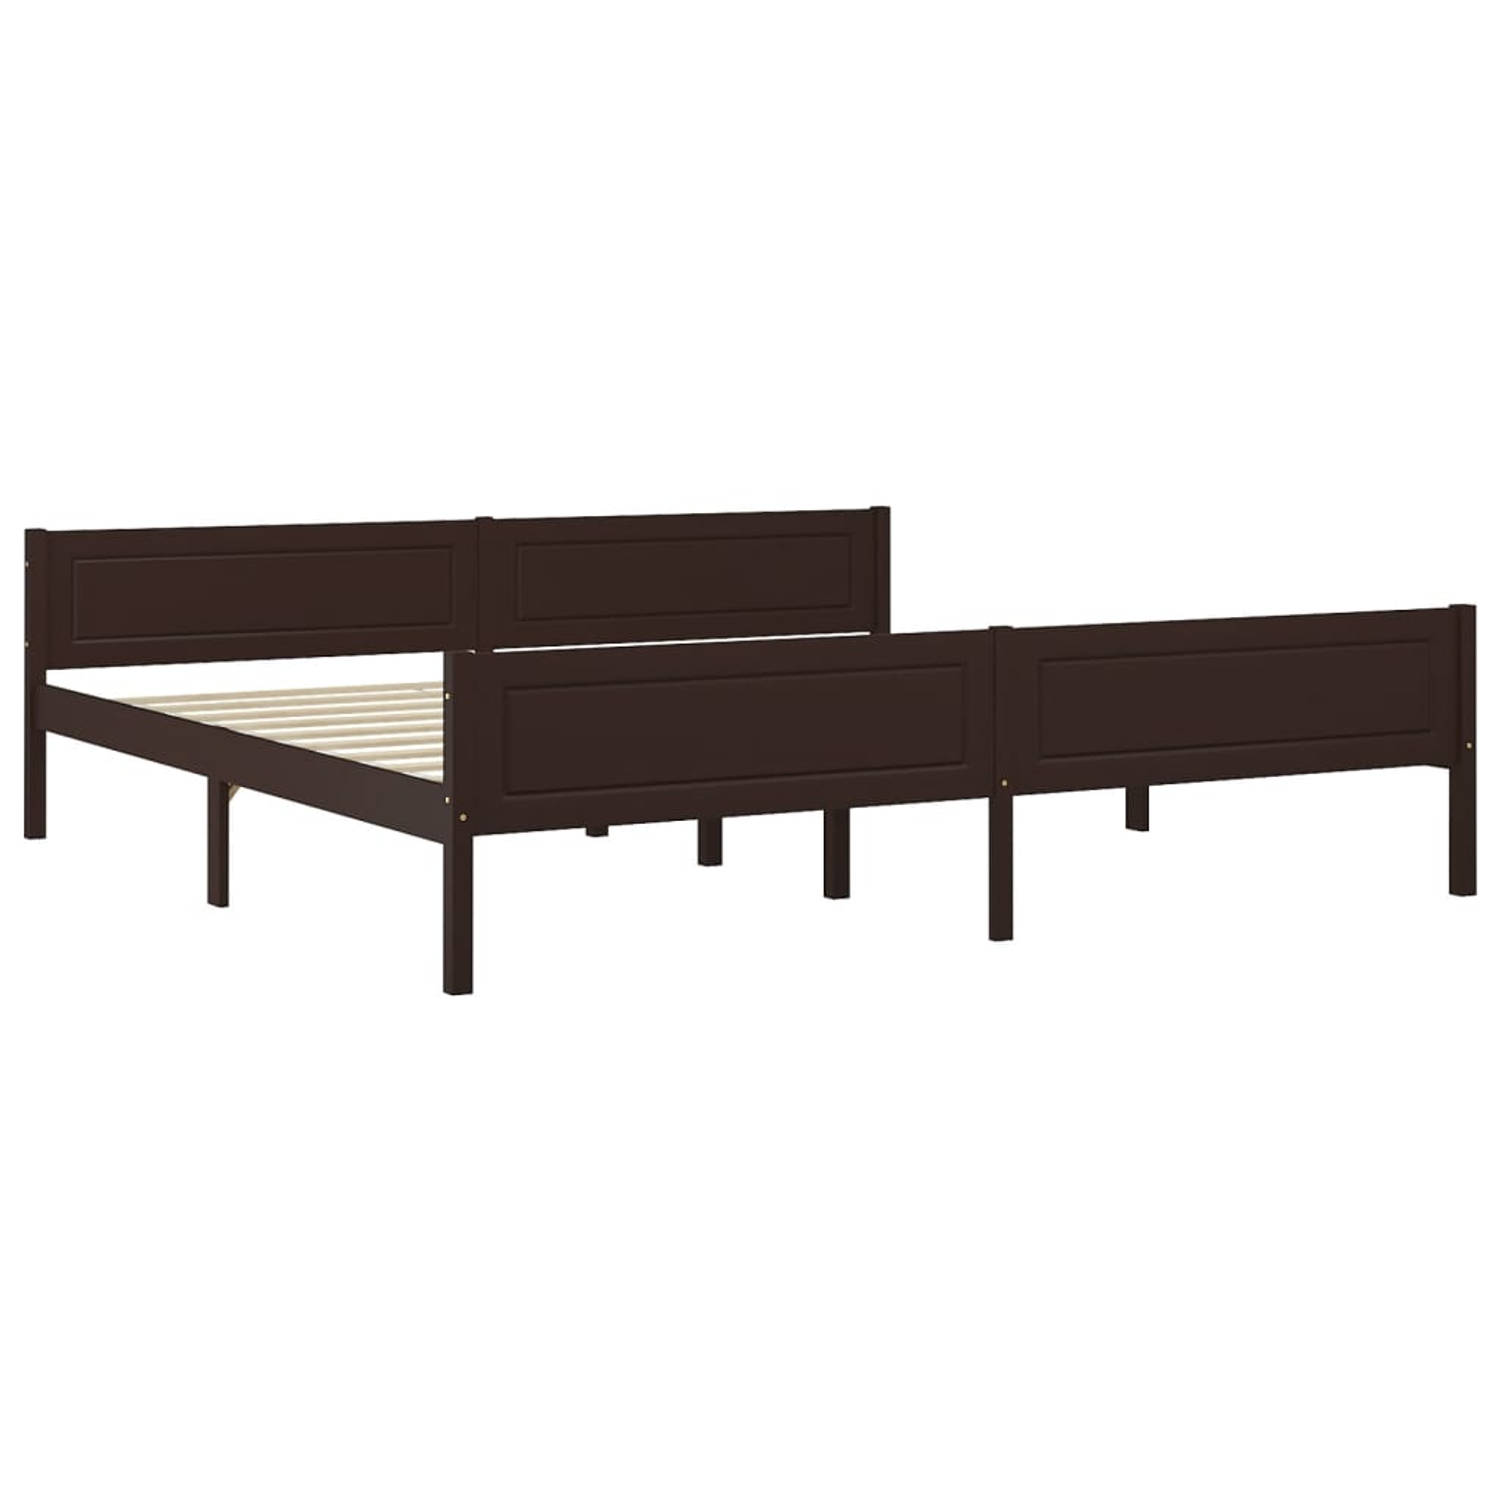 The Living Store Bedframe massief grenenhout donkerbruin 200x200 cm - Bedframe - Bedframe - Bed Frame - Bed Frames - Bed - Bedden - 2-persoonsbed - 2-persoonsbedden - Tweepersoons